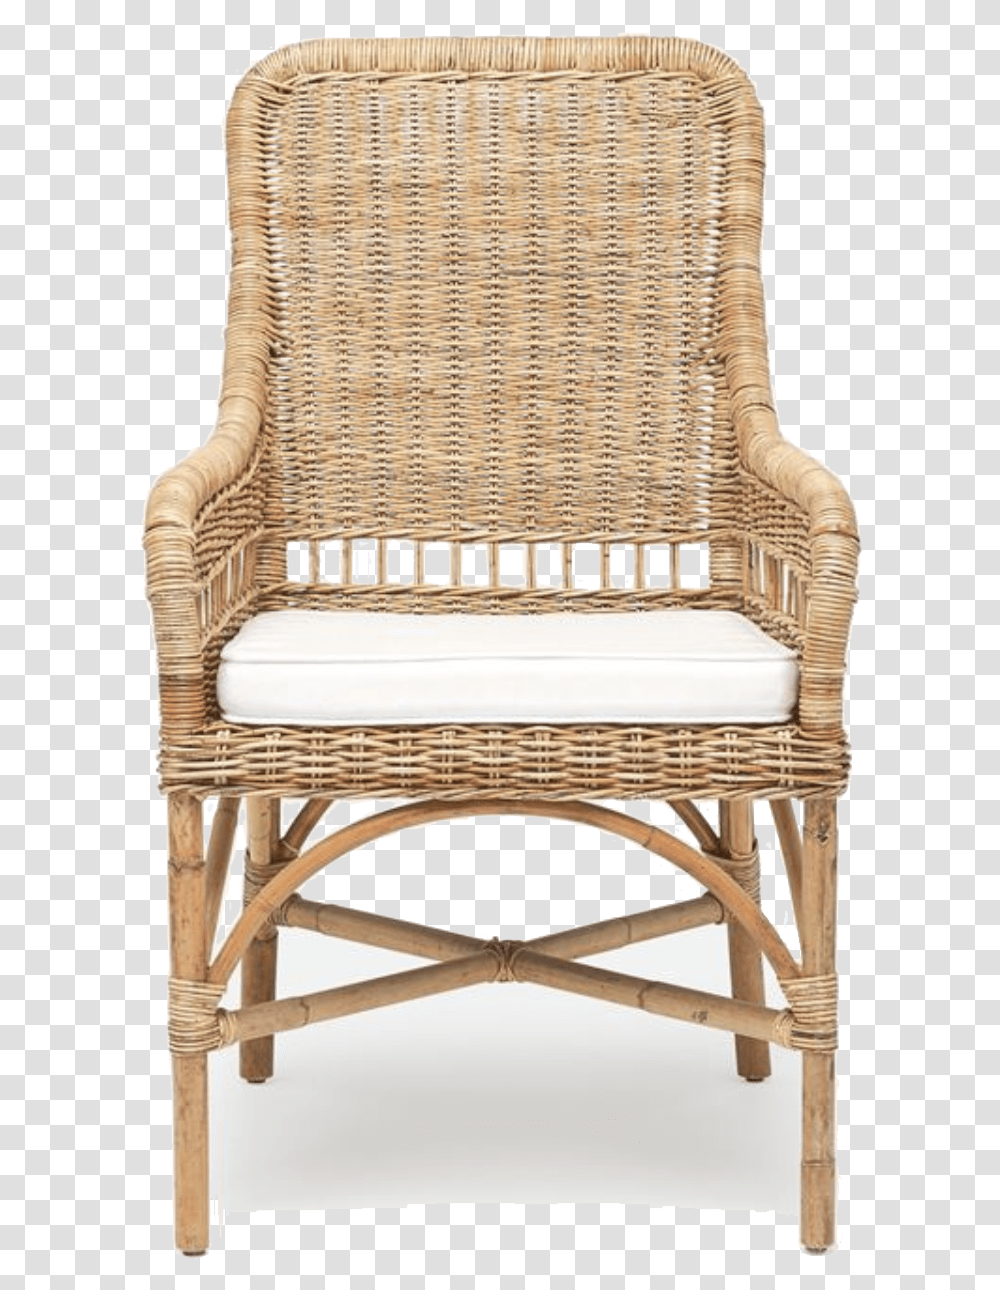 Wicker Arm Chair With Cushion Front View Chair, Furniture, Armchair, Rug Transparent Png